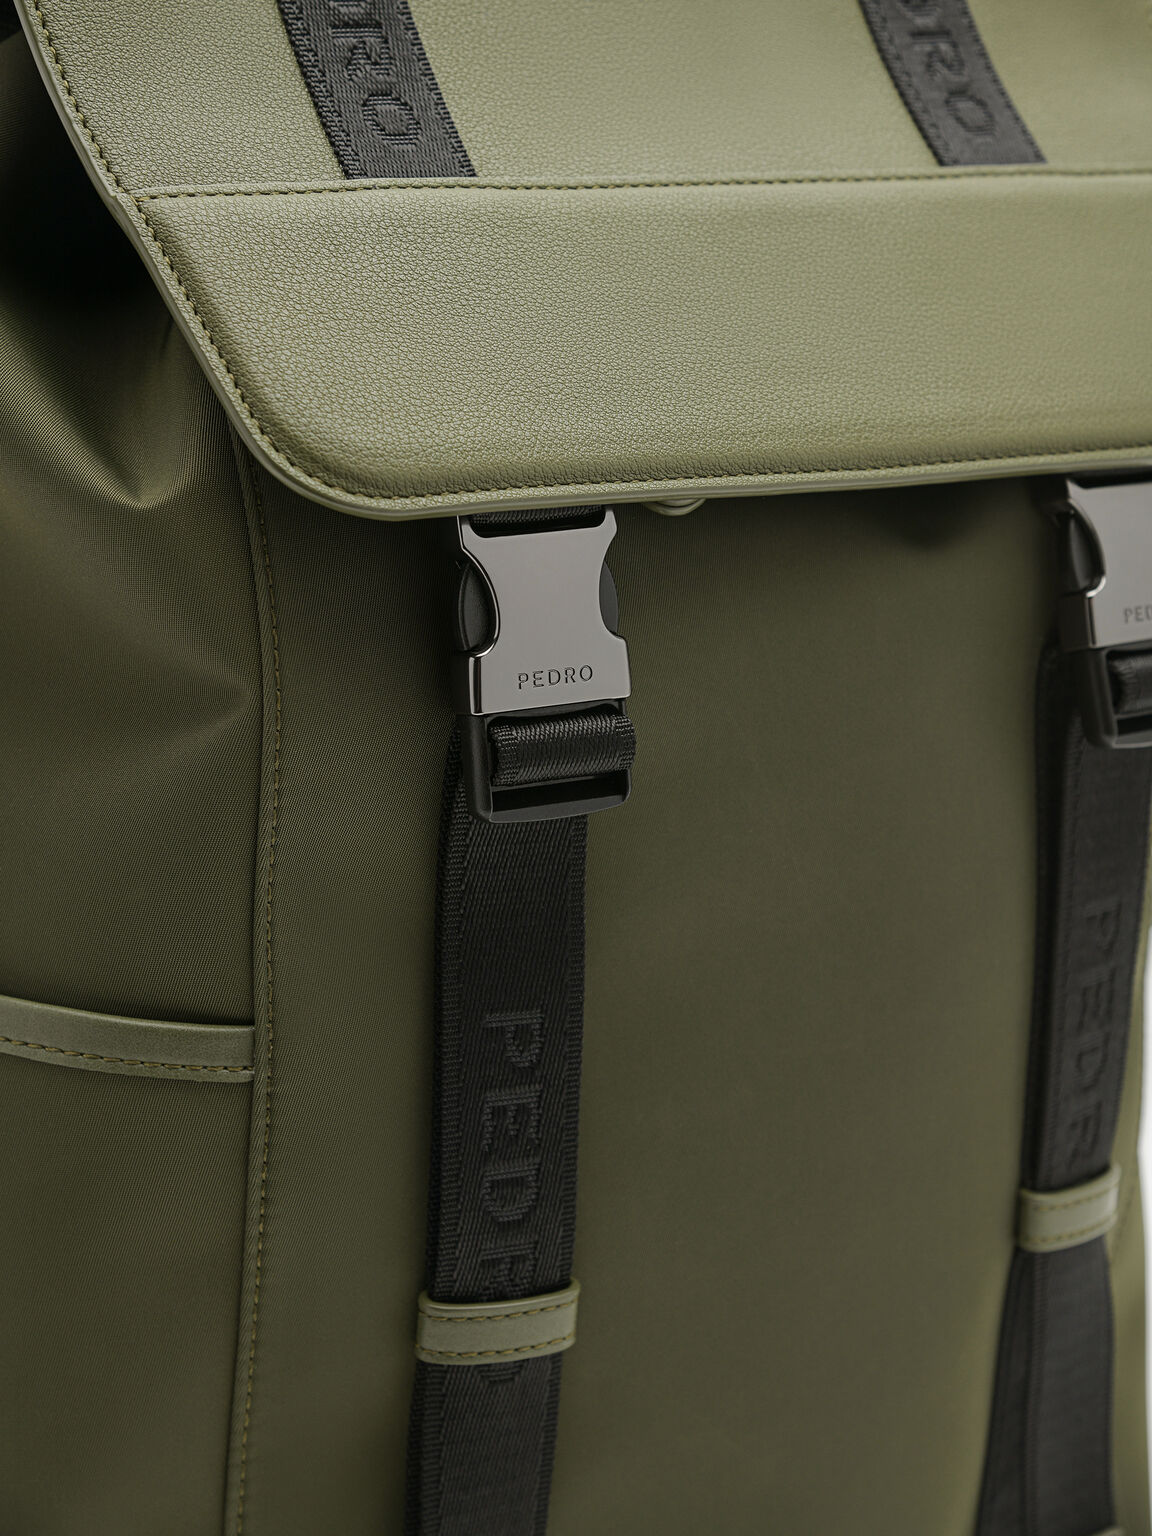 Rigby Backpack, Military Green, hi-res